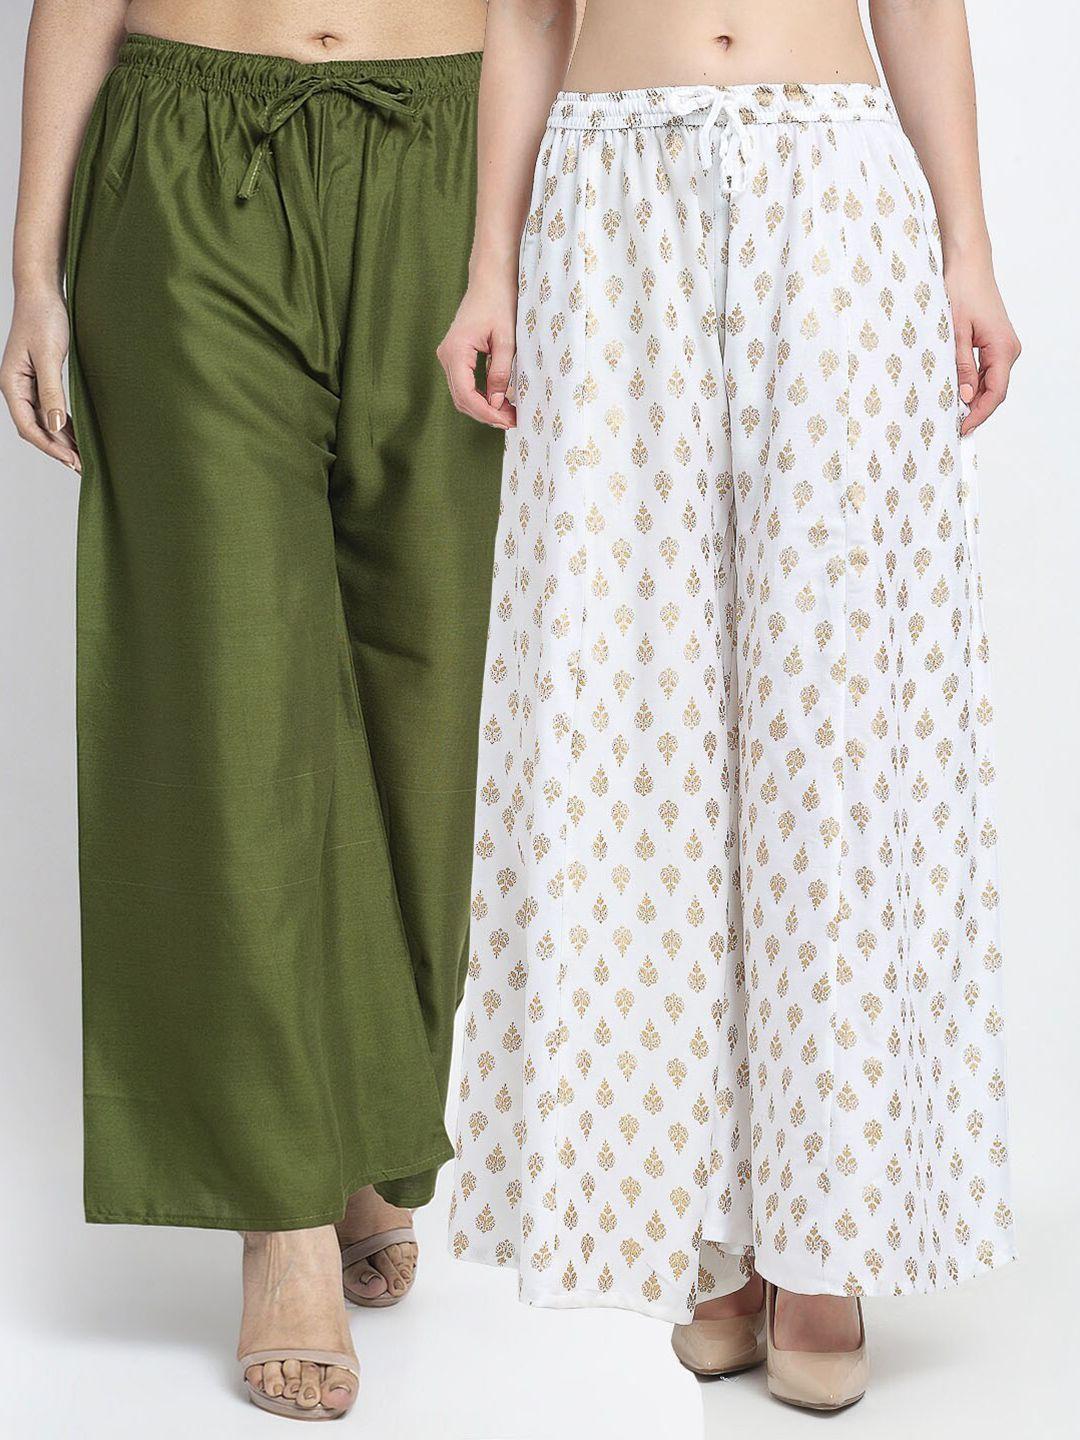 jinfo-women-olive-green-&-white-2-knitted-ethnic-palazzos